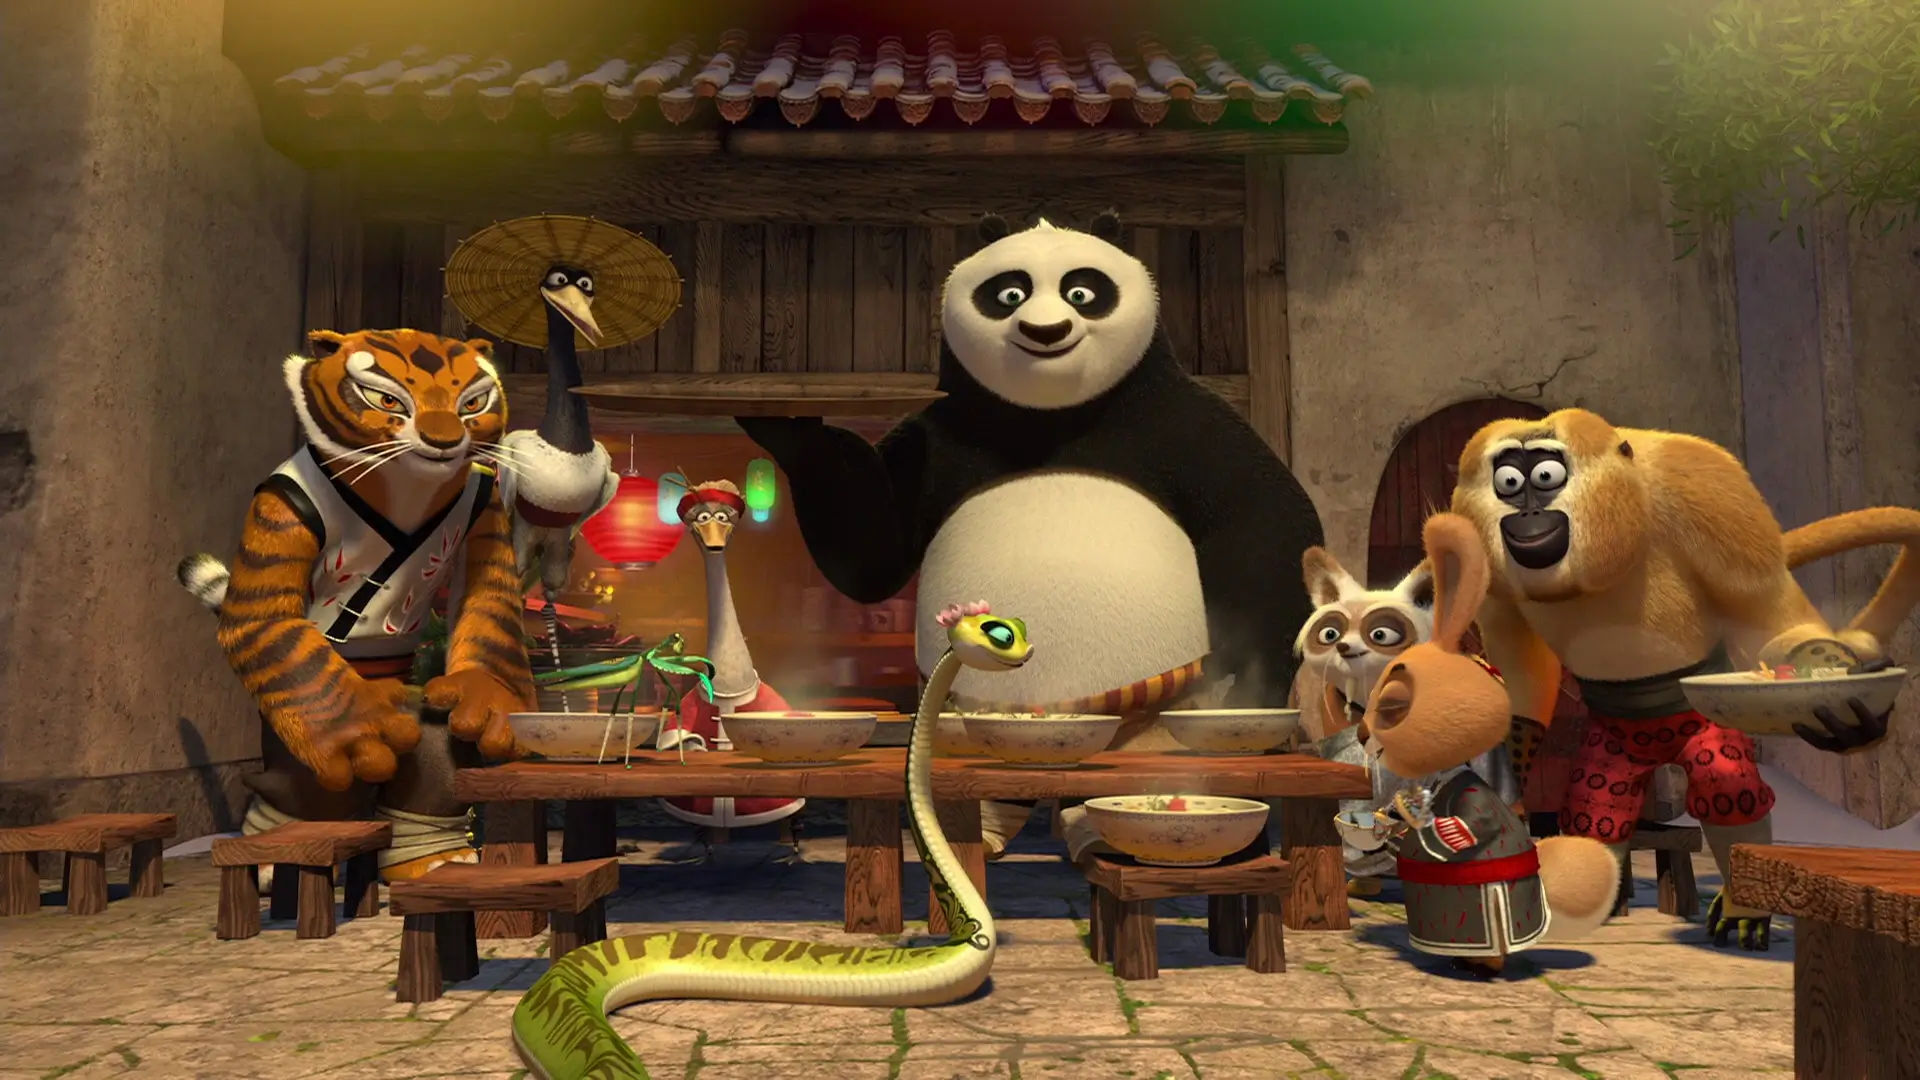 Kung Fu Panda 4 director confirmed the Furious Five will make an appearance